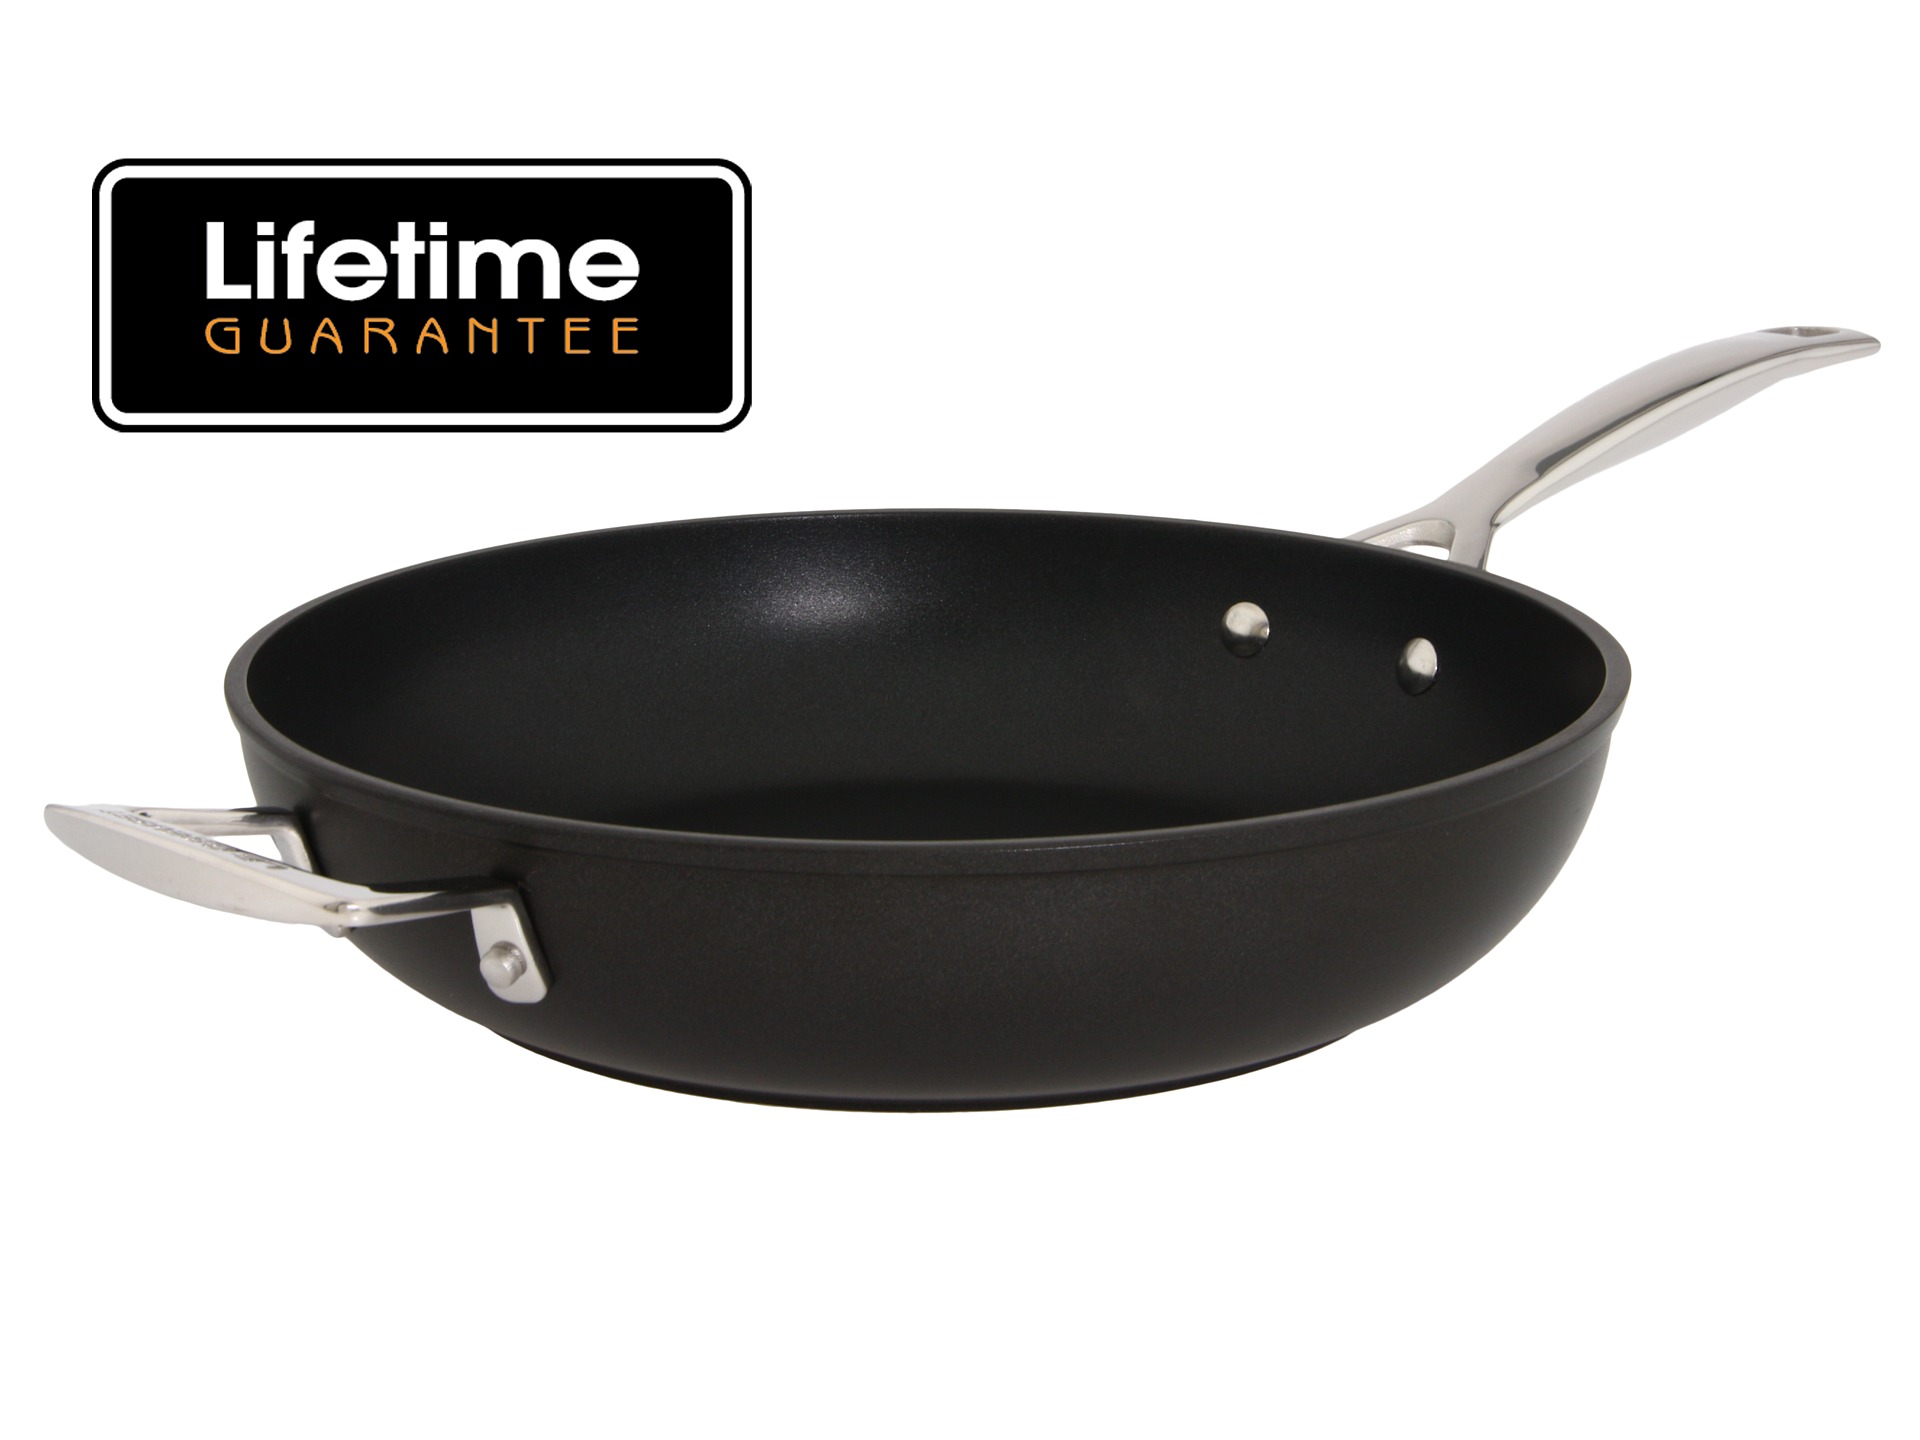 Le Creuset Forged Hard Anodized 11 Deep Fry Pan $139.99 $190.00 SALE 